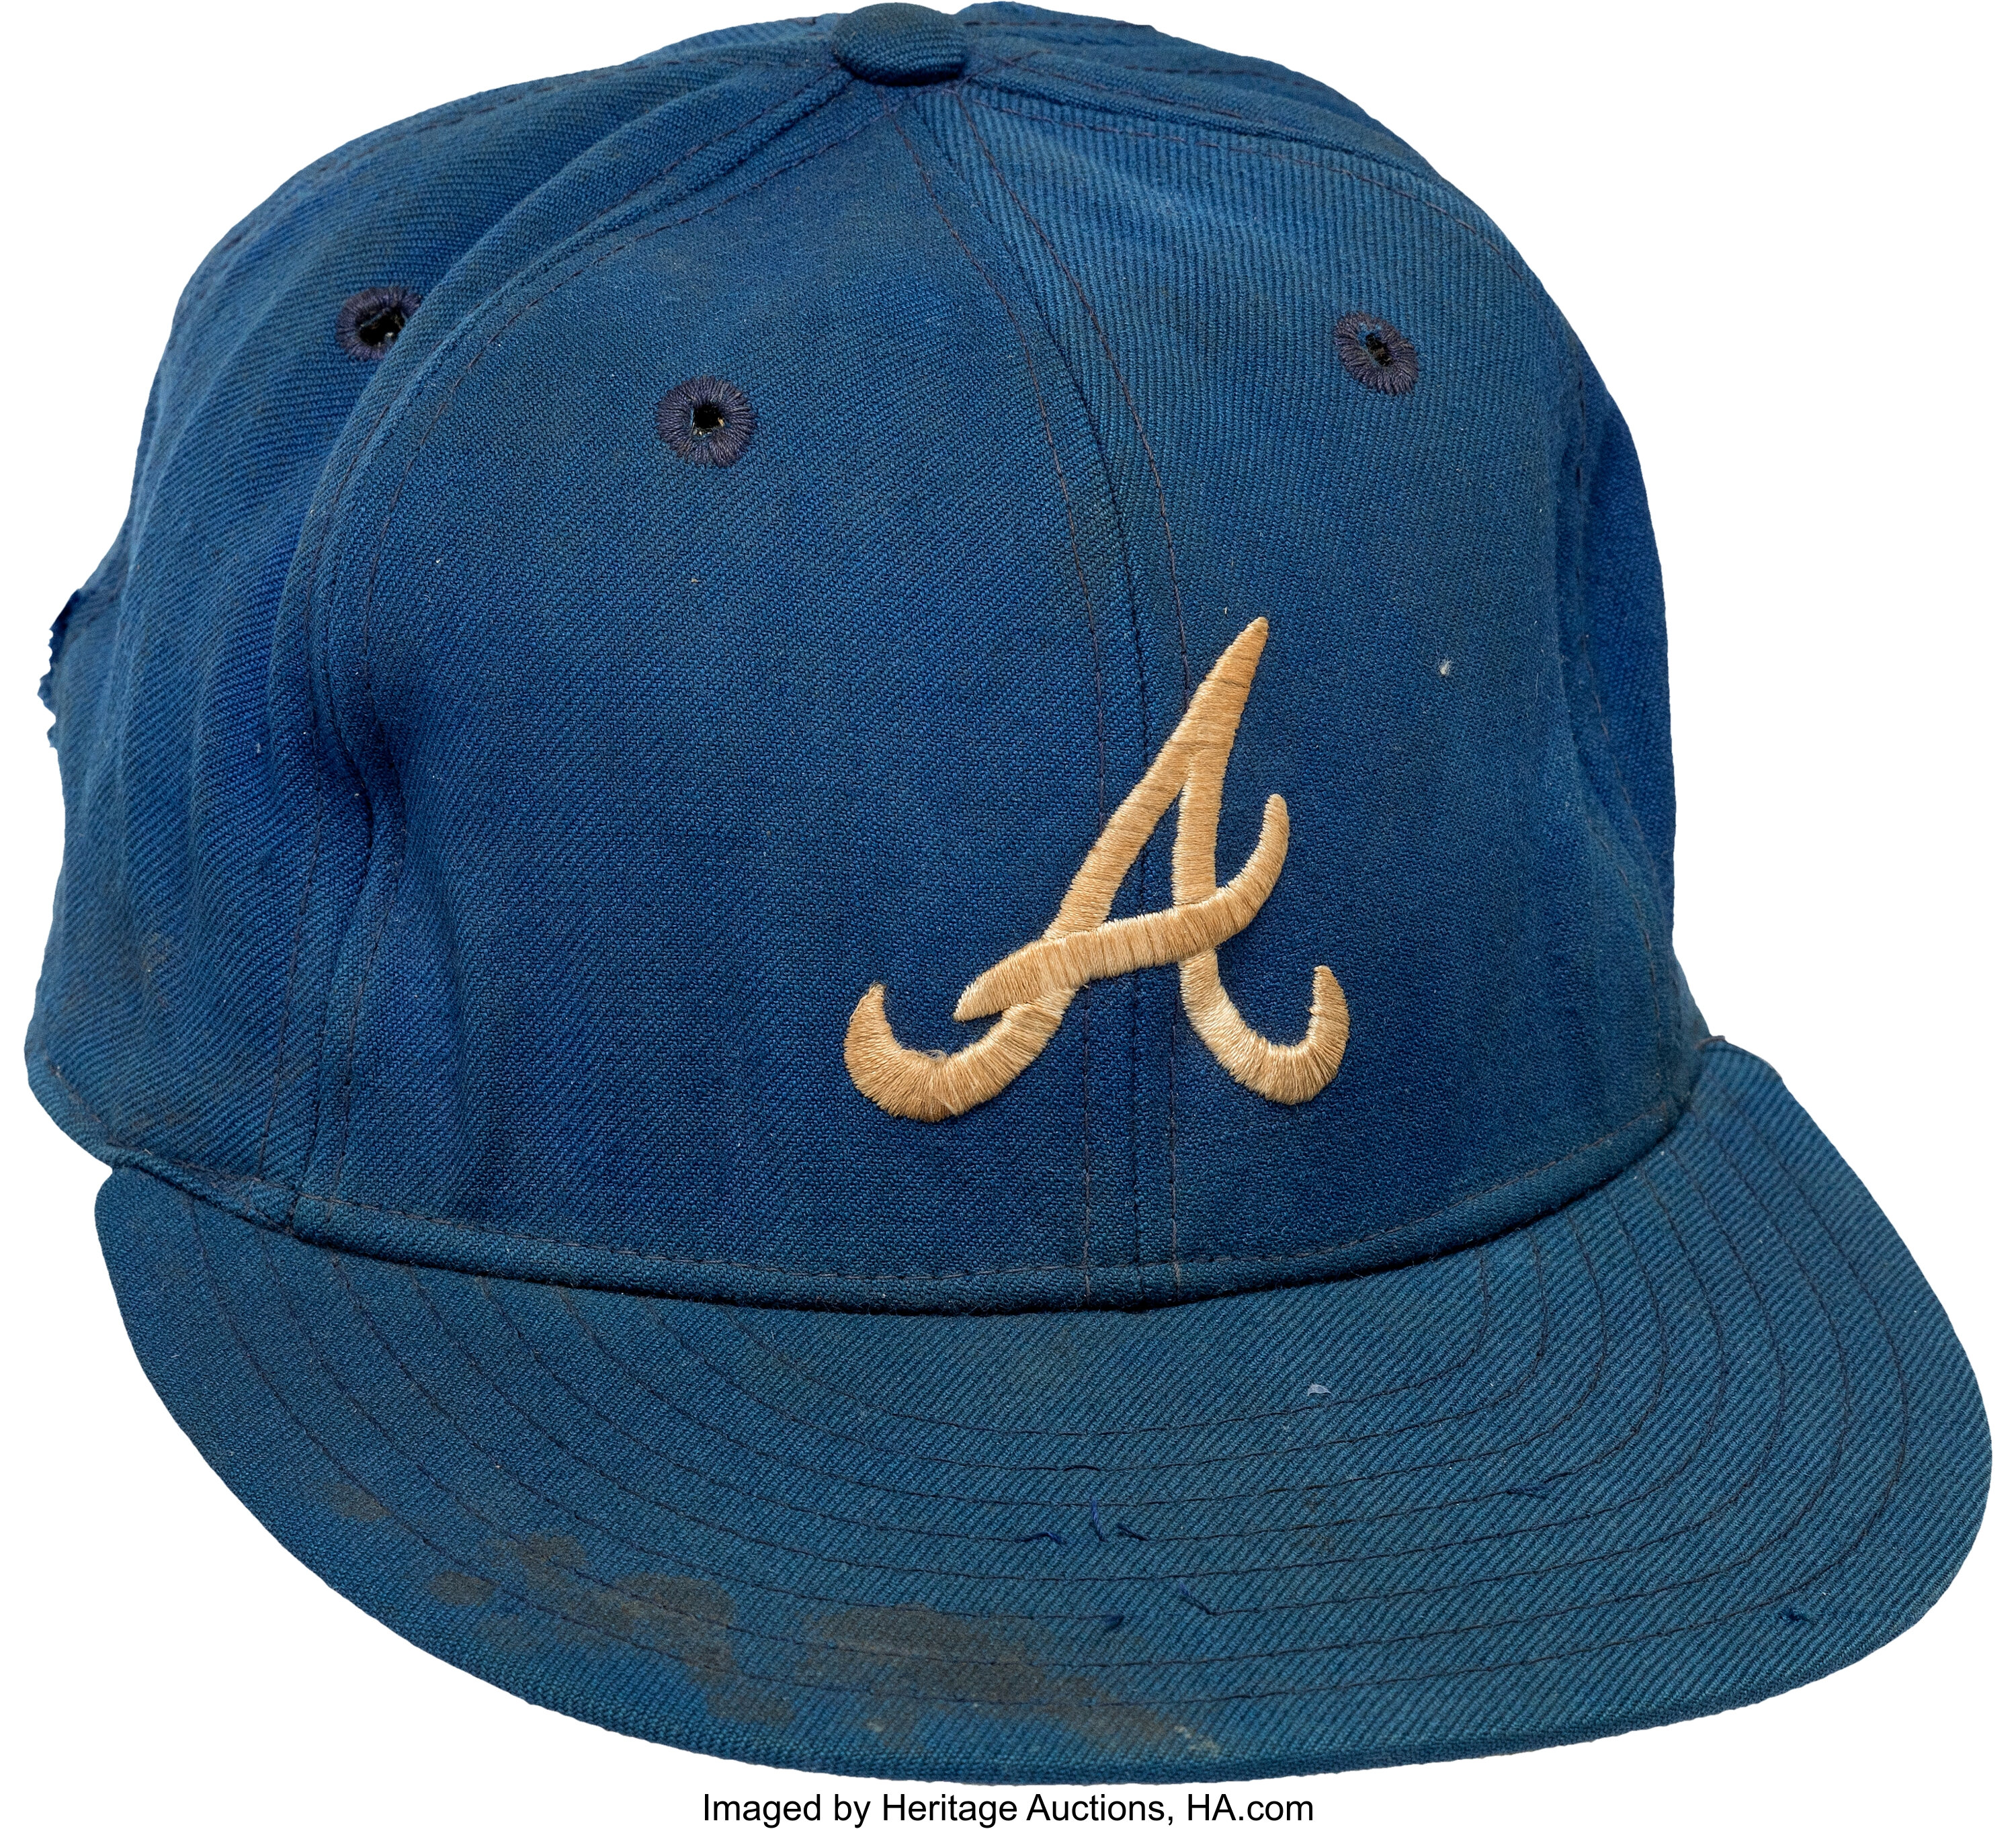 1981 Gaylord Perry Game Worn & Signed Atlanta Braves Cap.